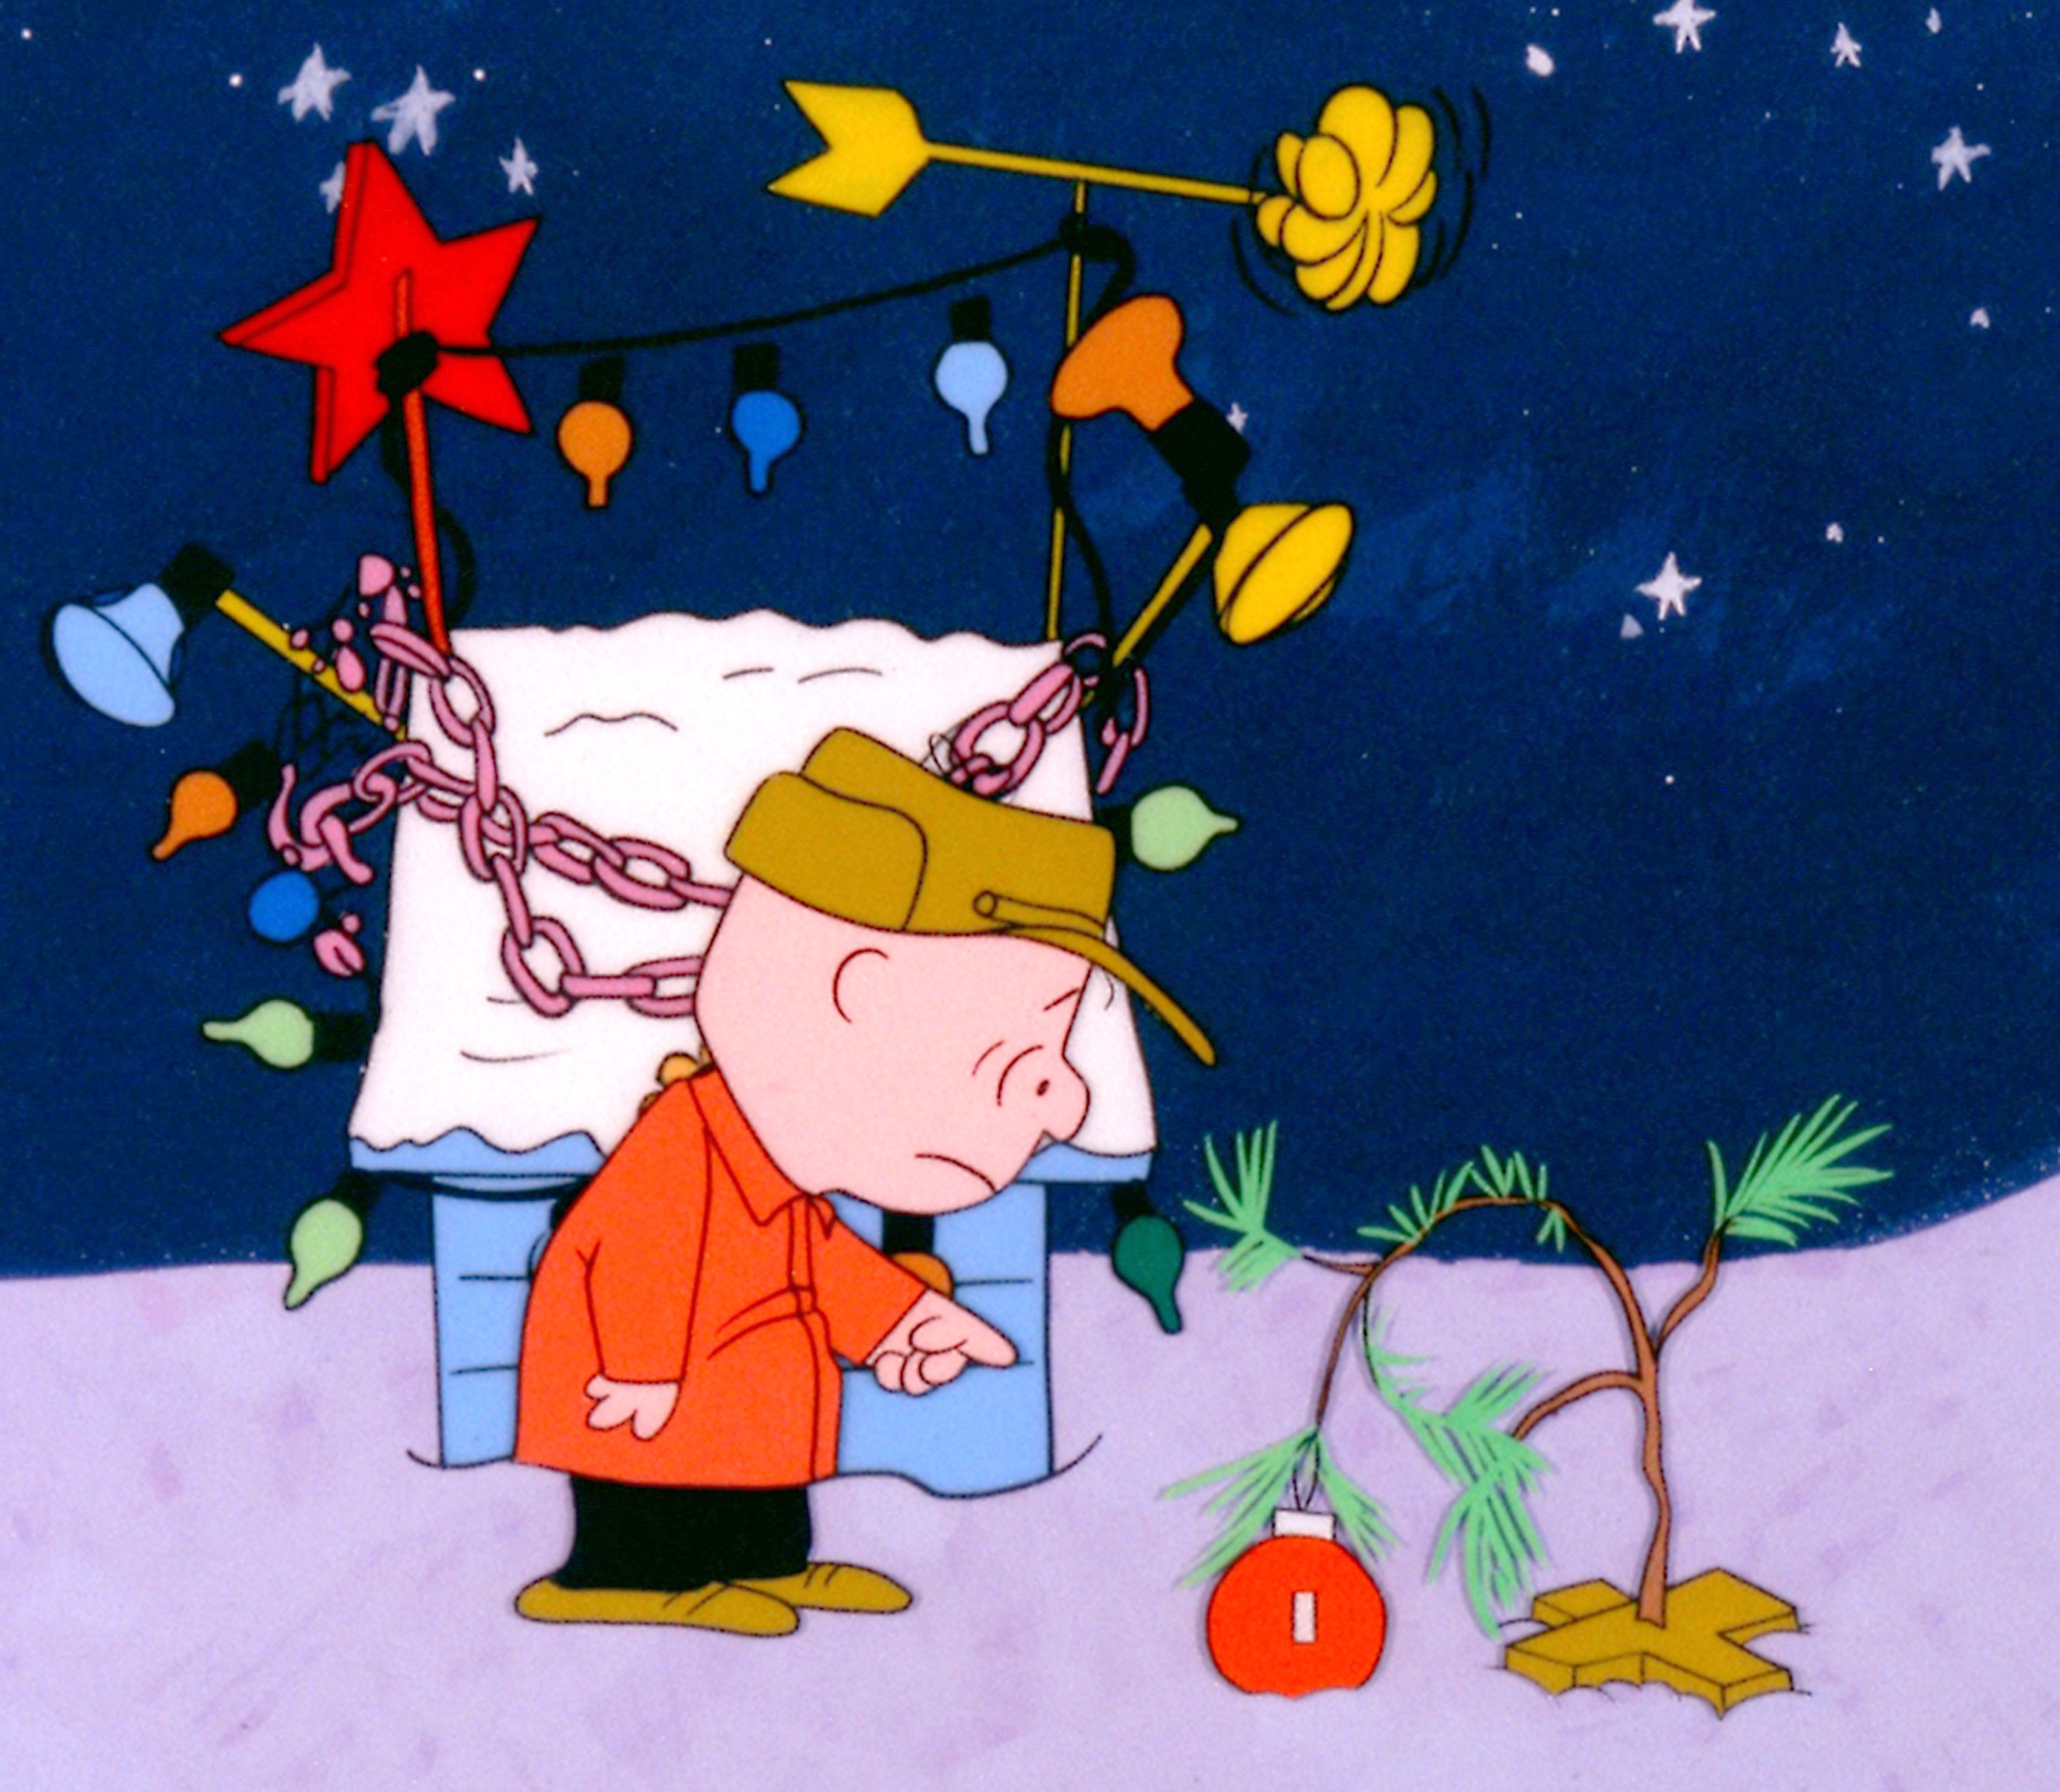 Charlie Brown Christmas Tree Wallpaper Image Amp Pictures